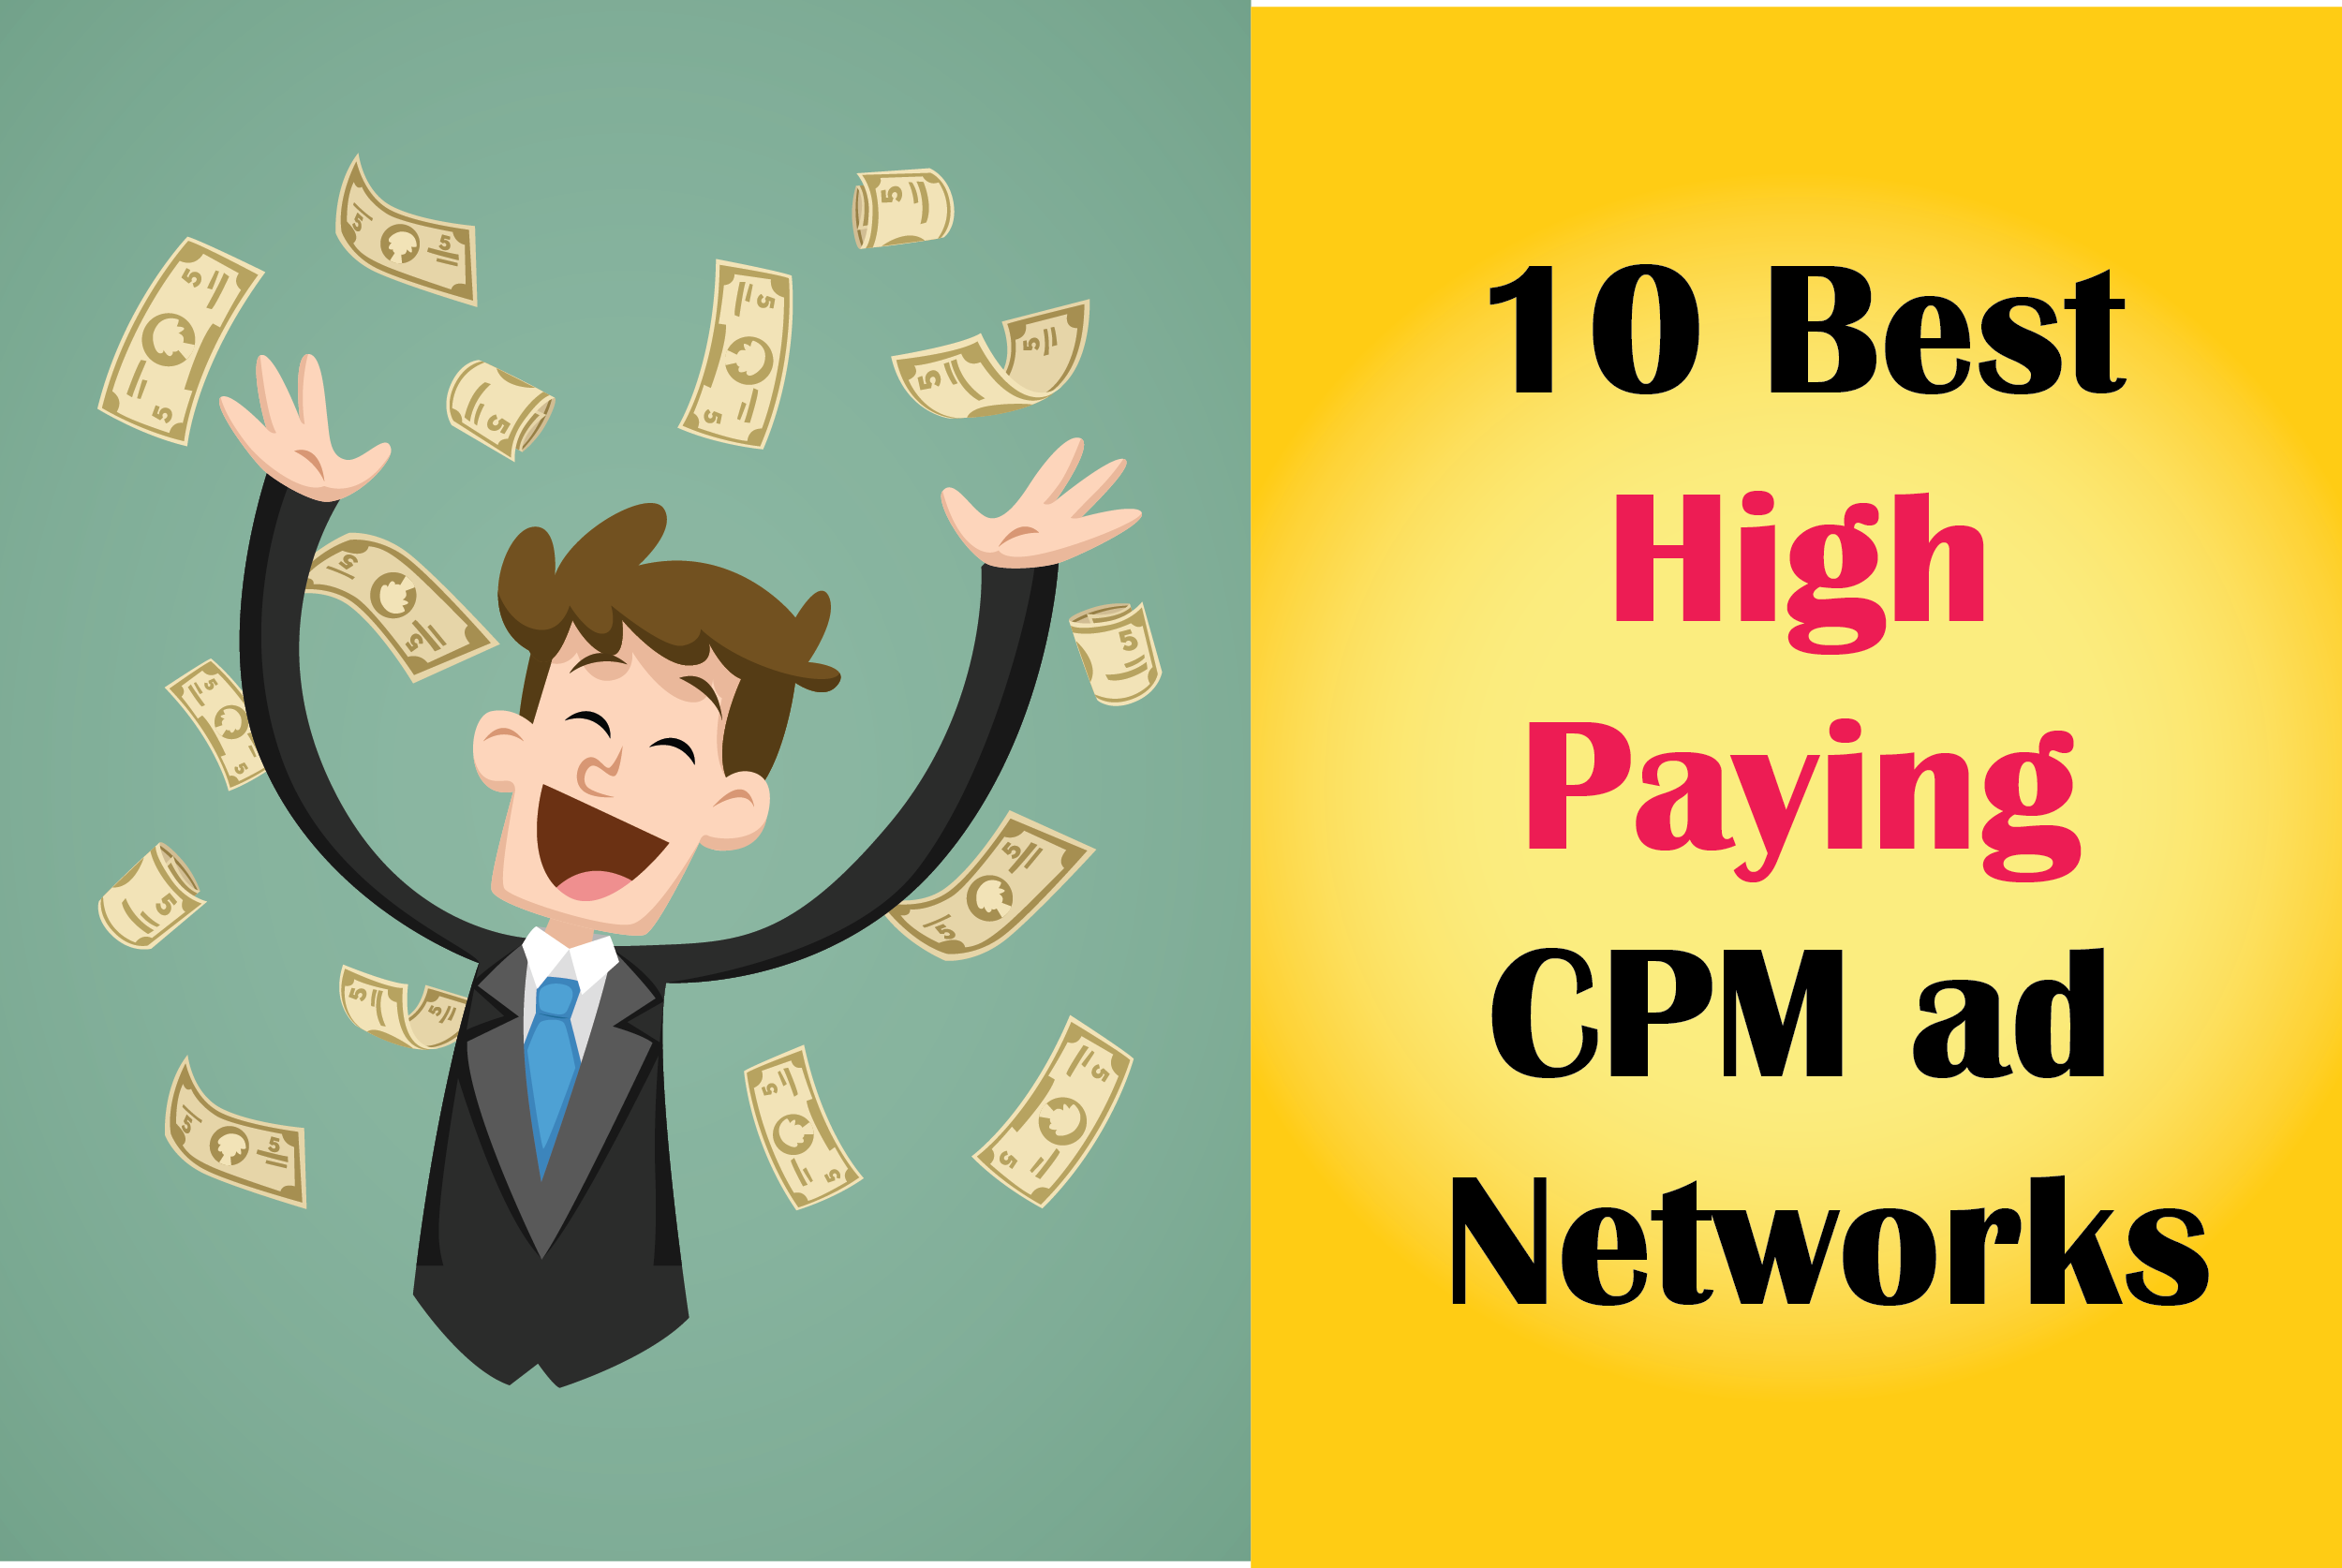 10 Best High Paying CPM ad Networks